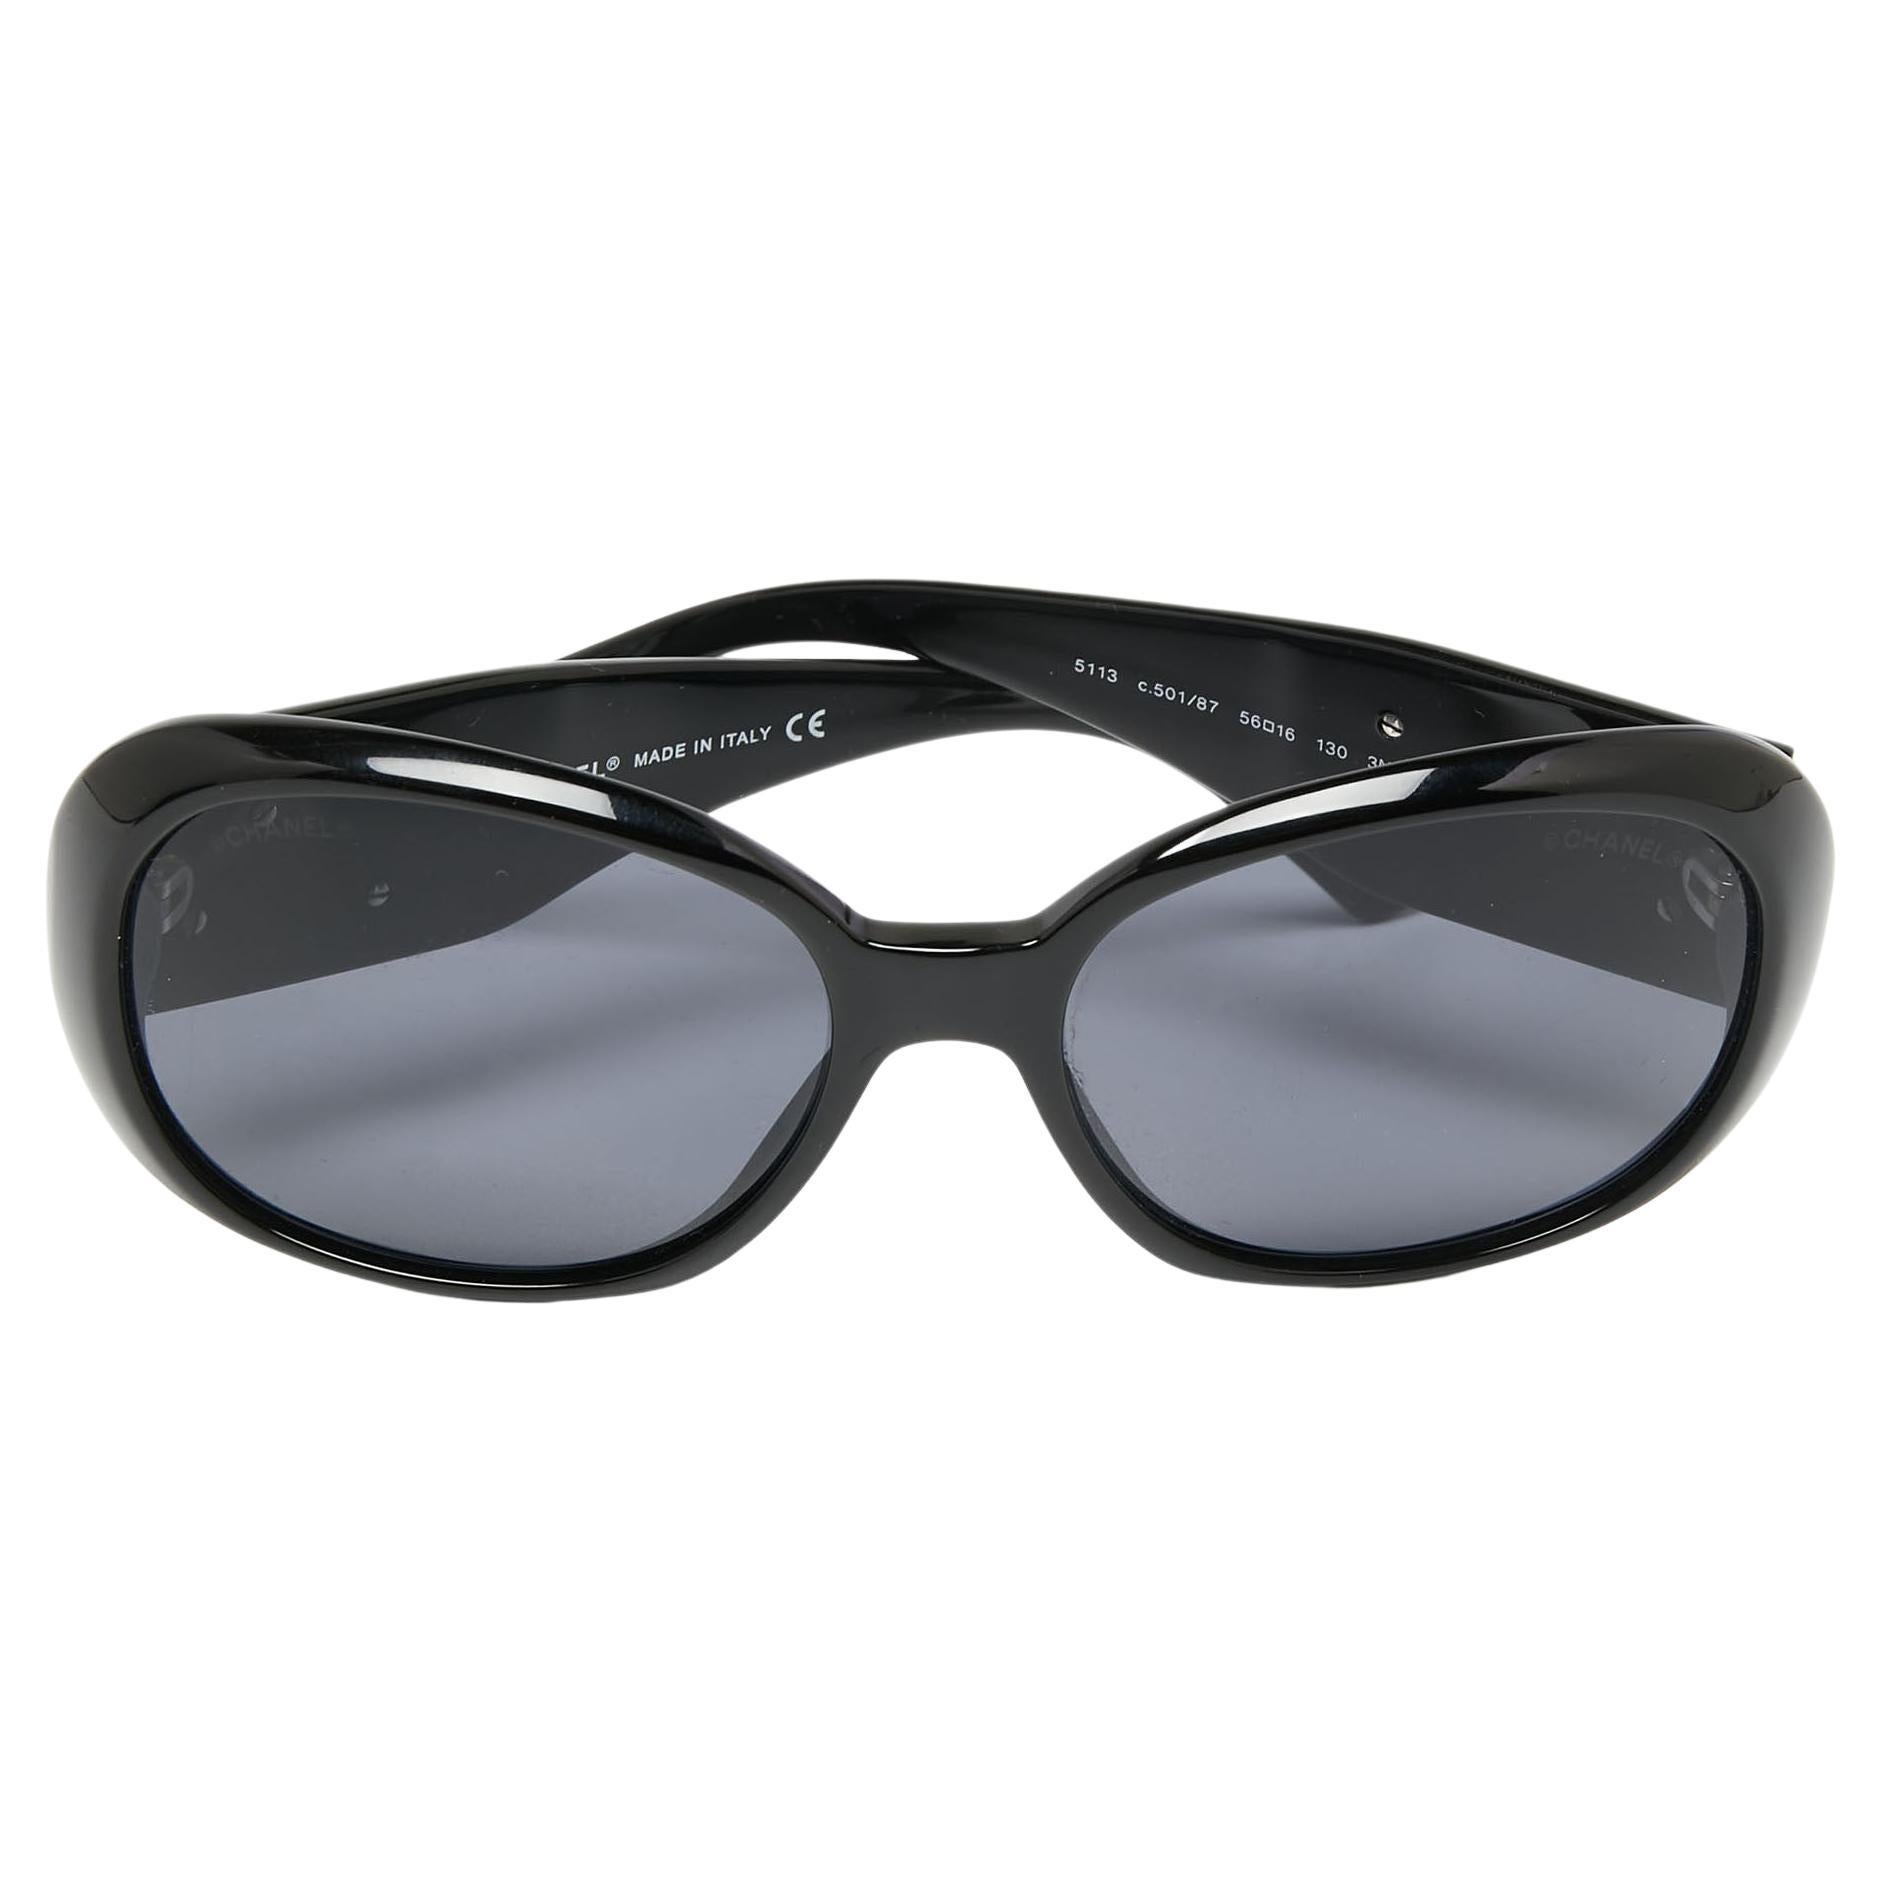 Chanel Rectangle Sunglasses - 4 For Sale on 1stDibs  chanel rectangle  sunglasses a71280 black, a71280 chanel sunglasses, chanel a71280 sunglasses